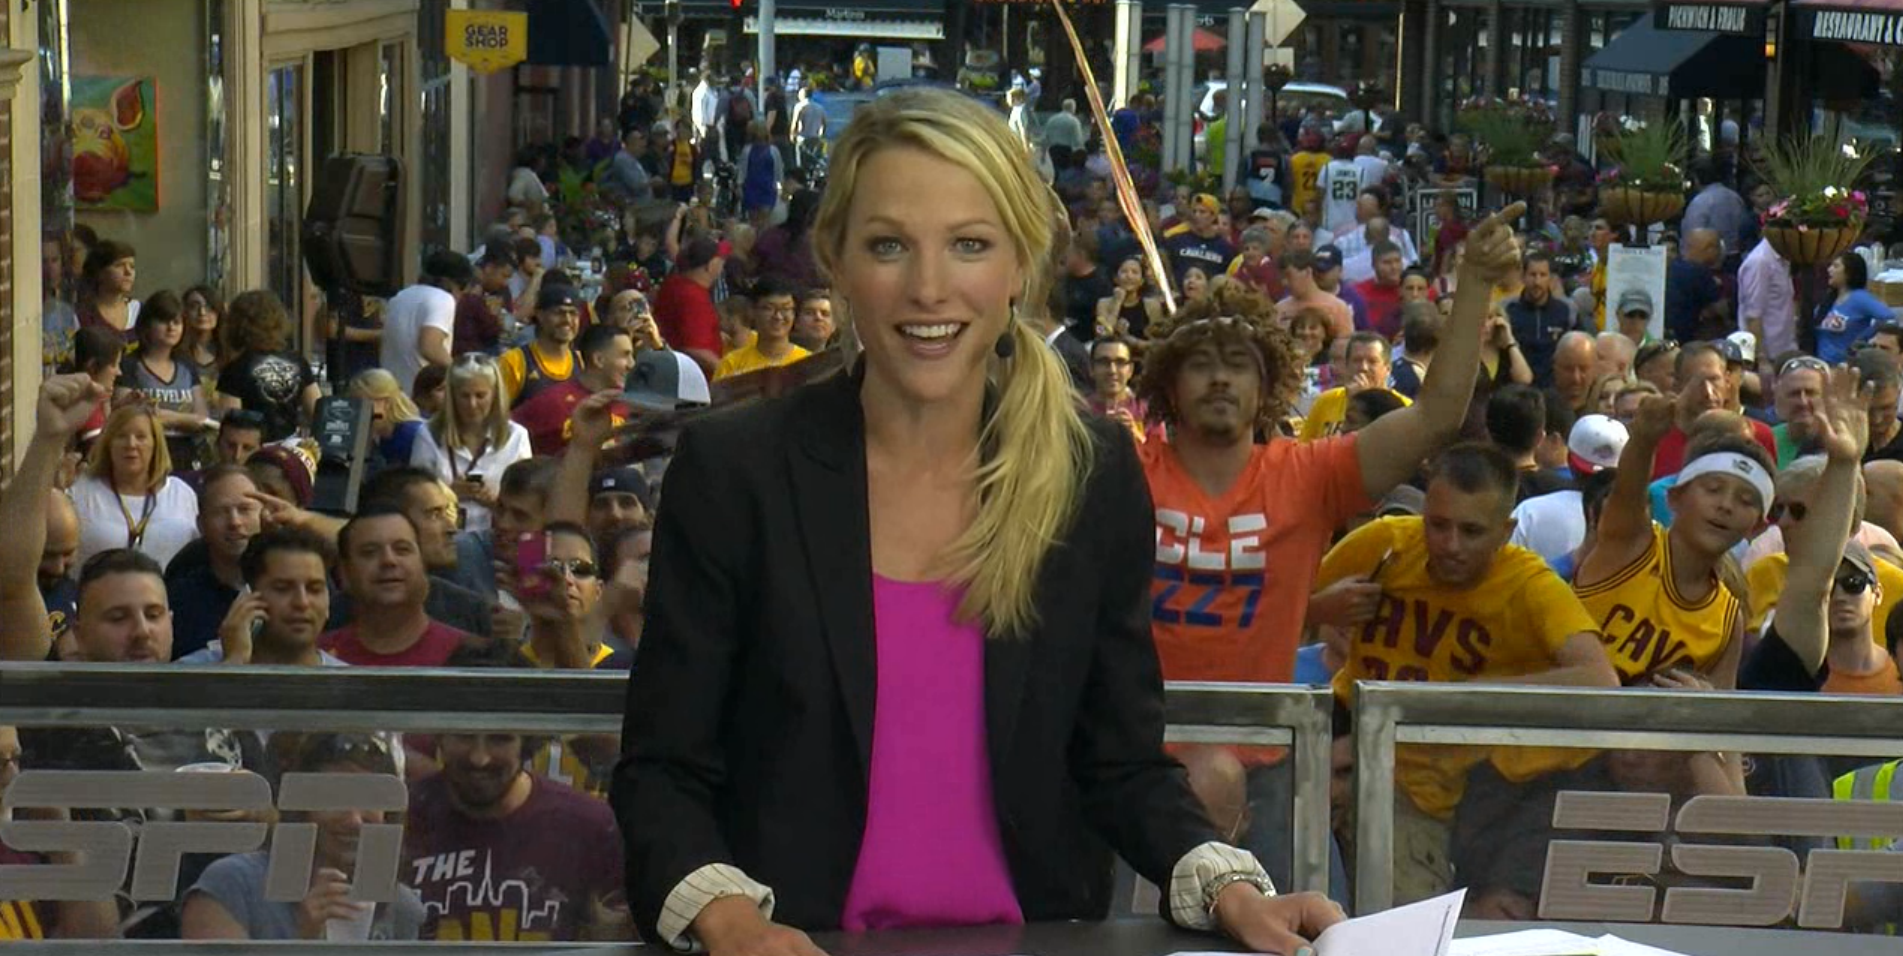 SportsCenter - and raucous crowds - returns to 4th Street in Cleveland - ESPN Front Row